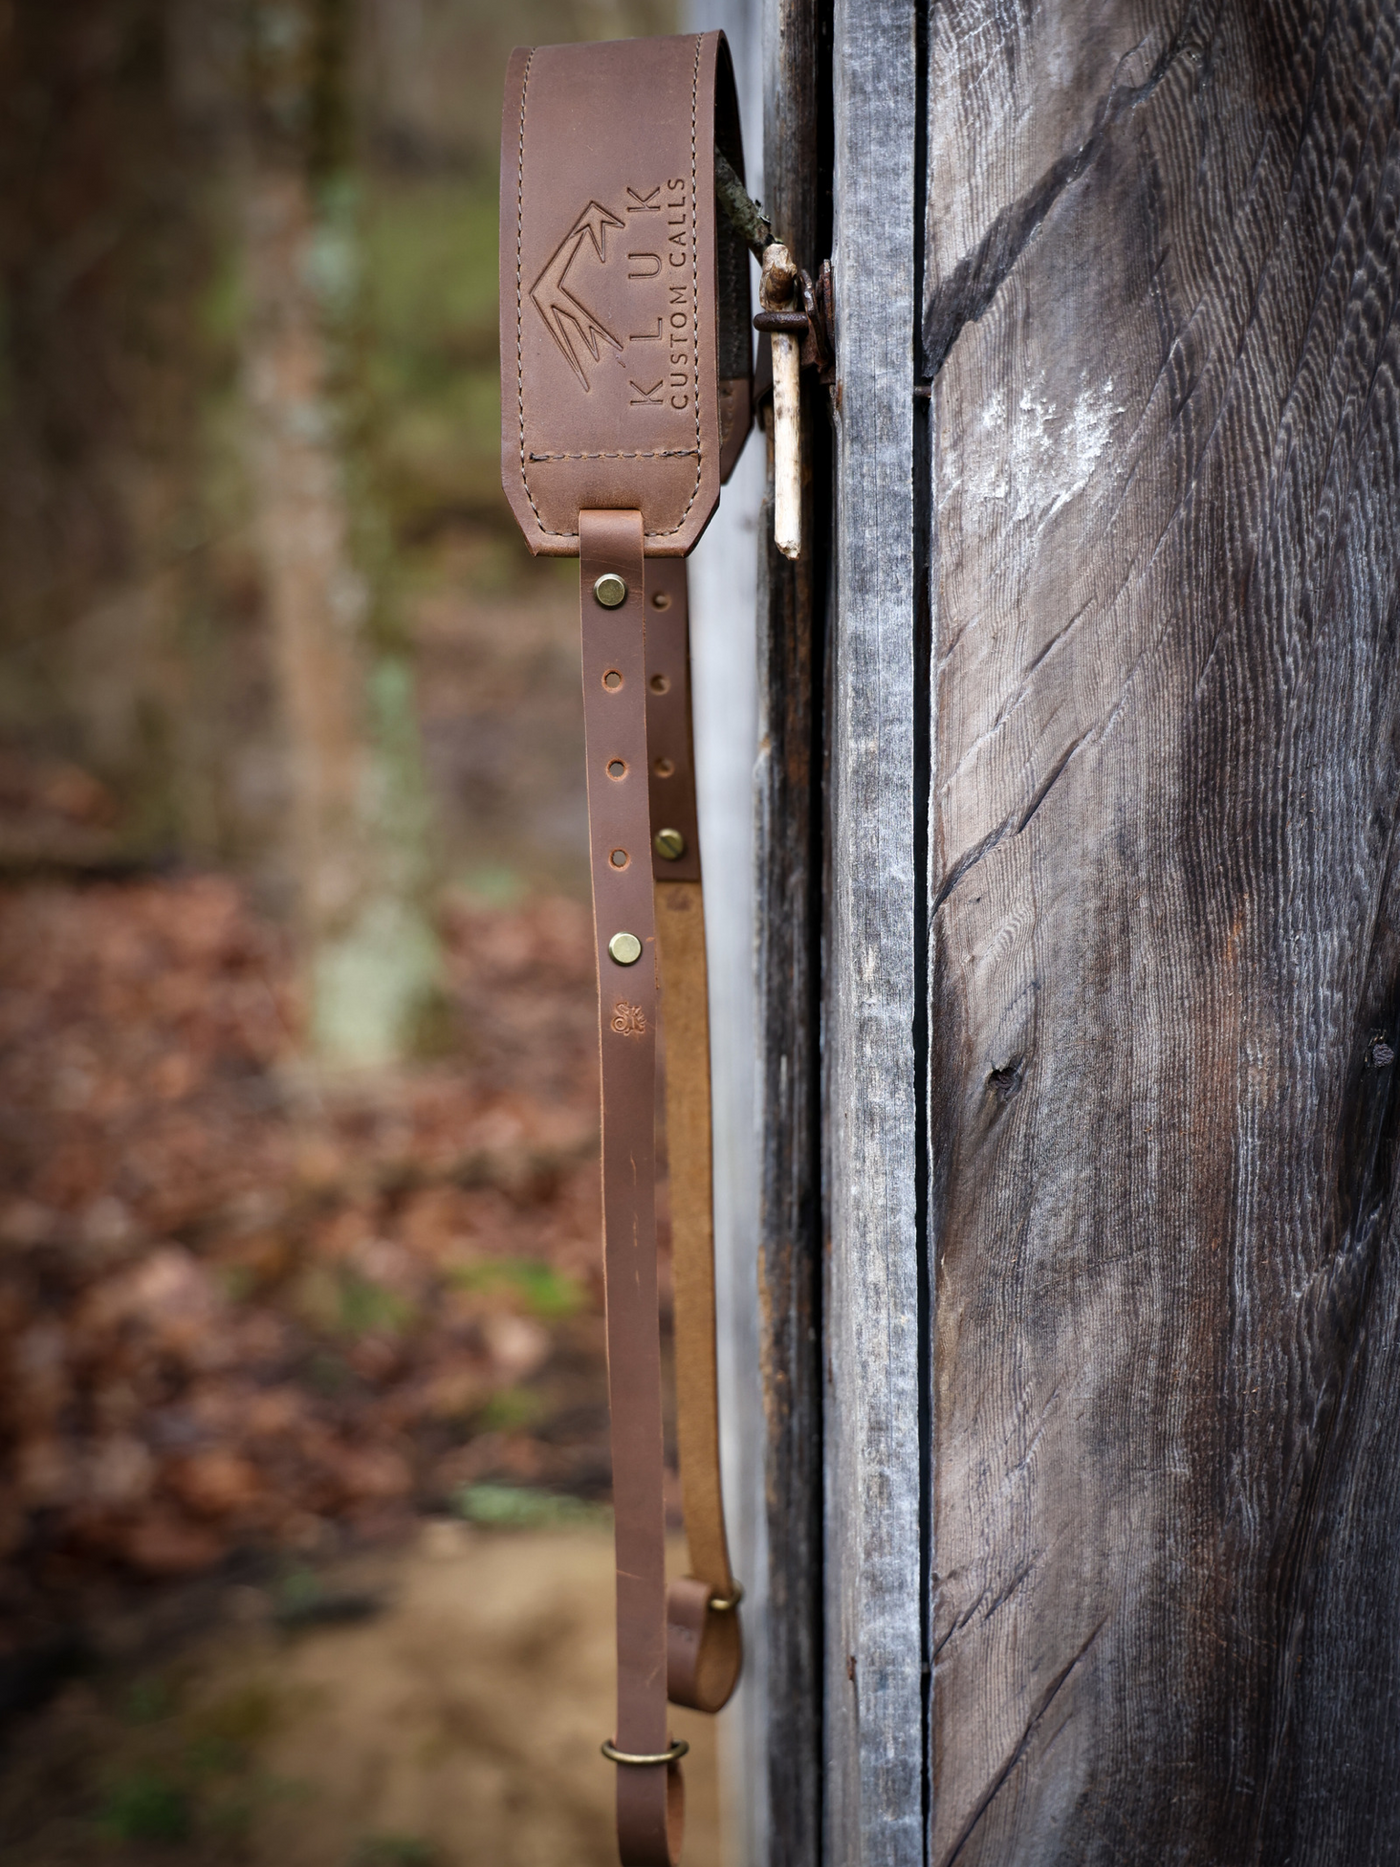 Leather Turkey Tote Product shot hung against a barn door showing the outdoors